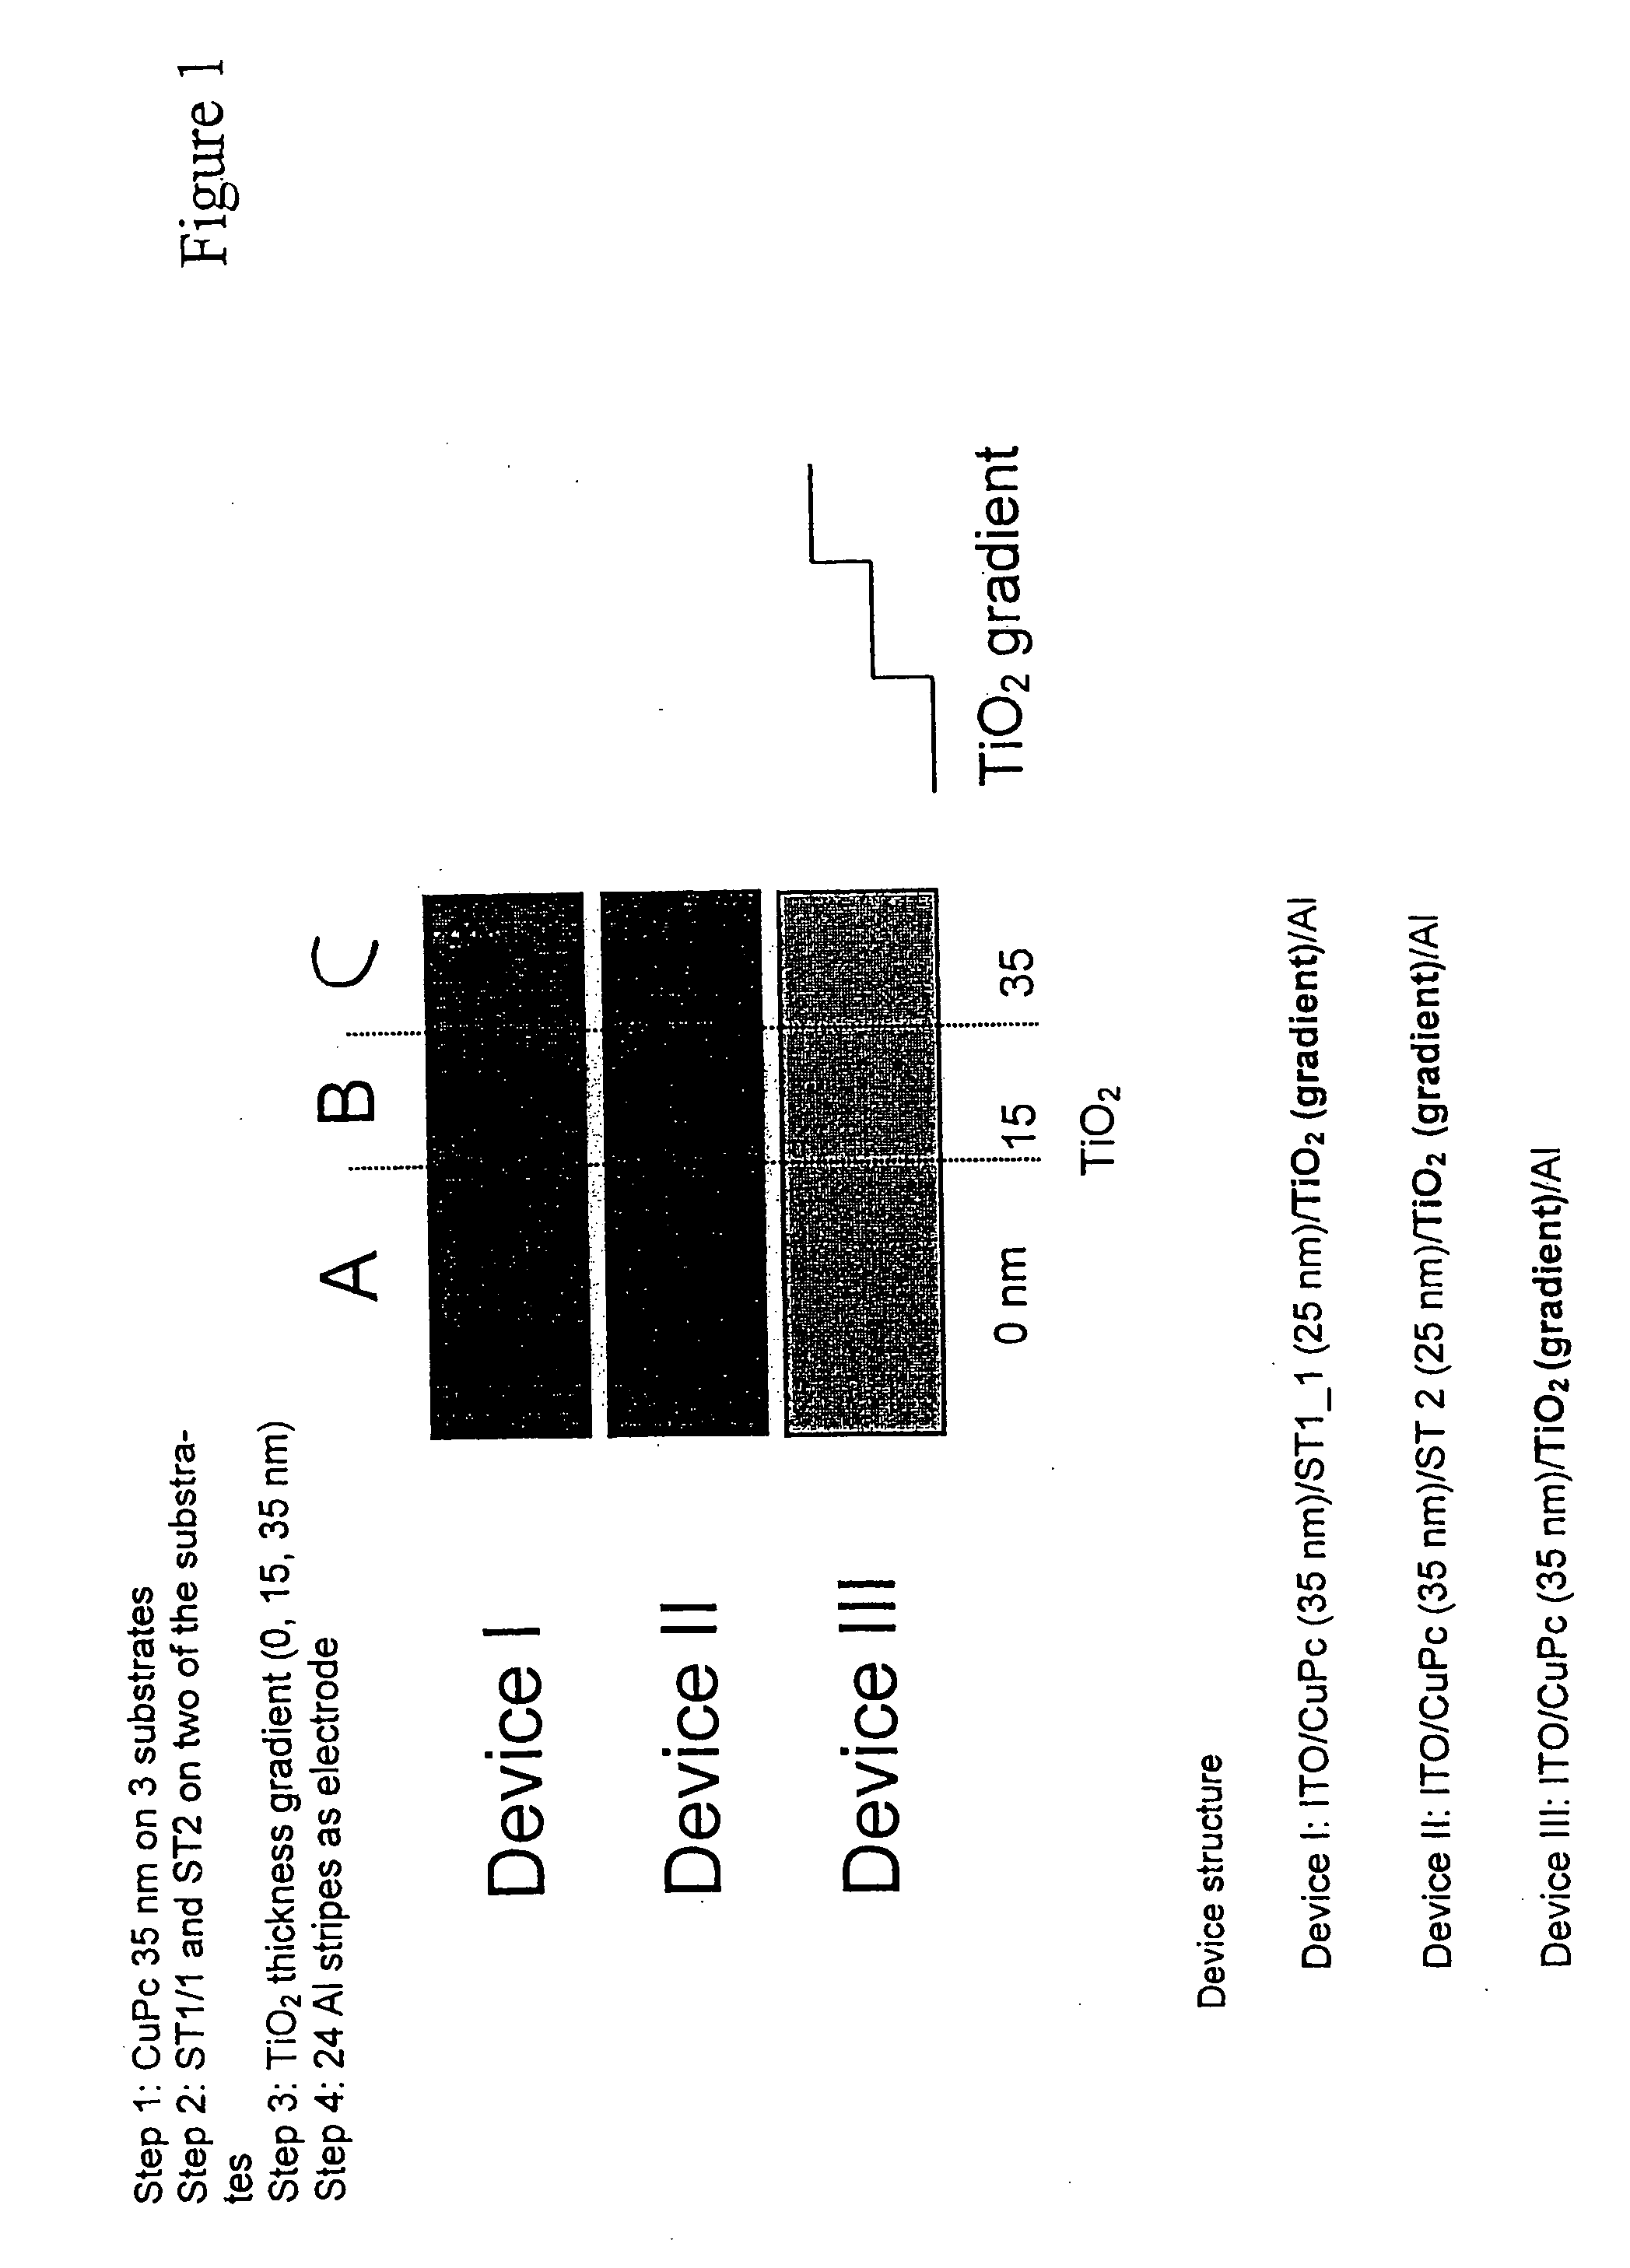 Hybrid solar cells with thermal deposited semiconductive oxide layer